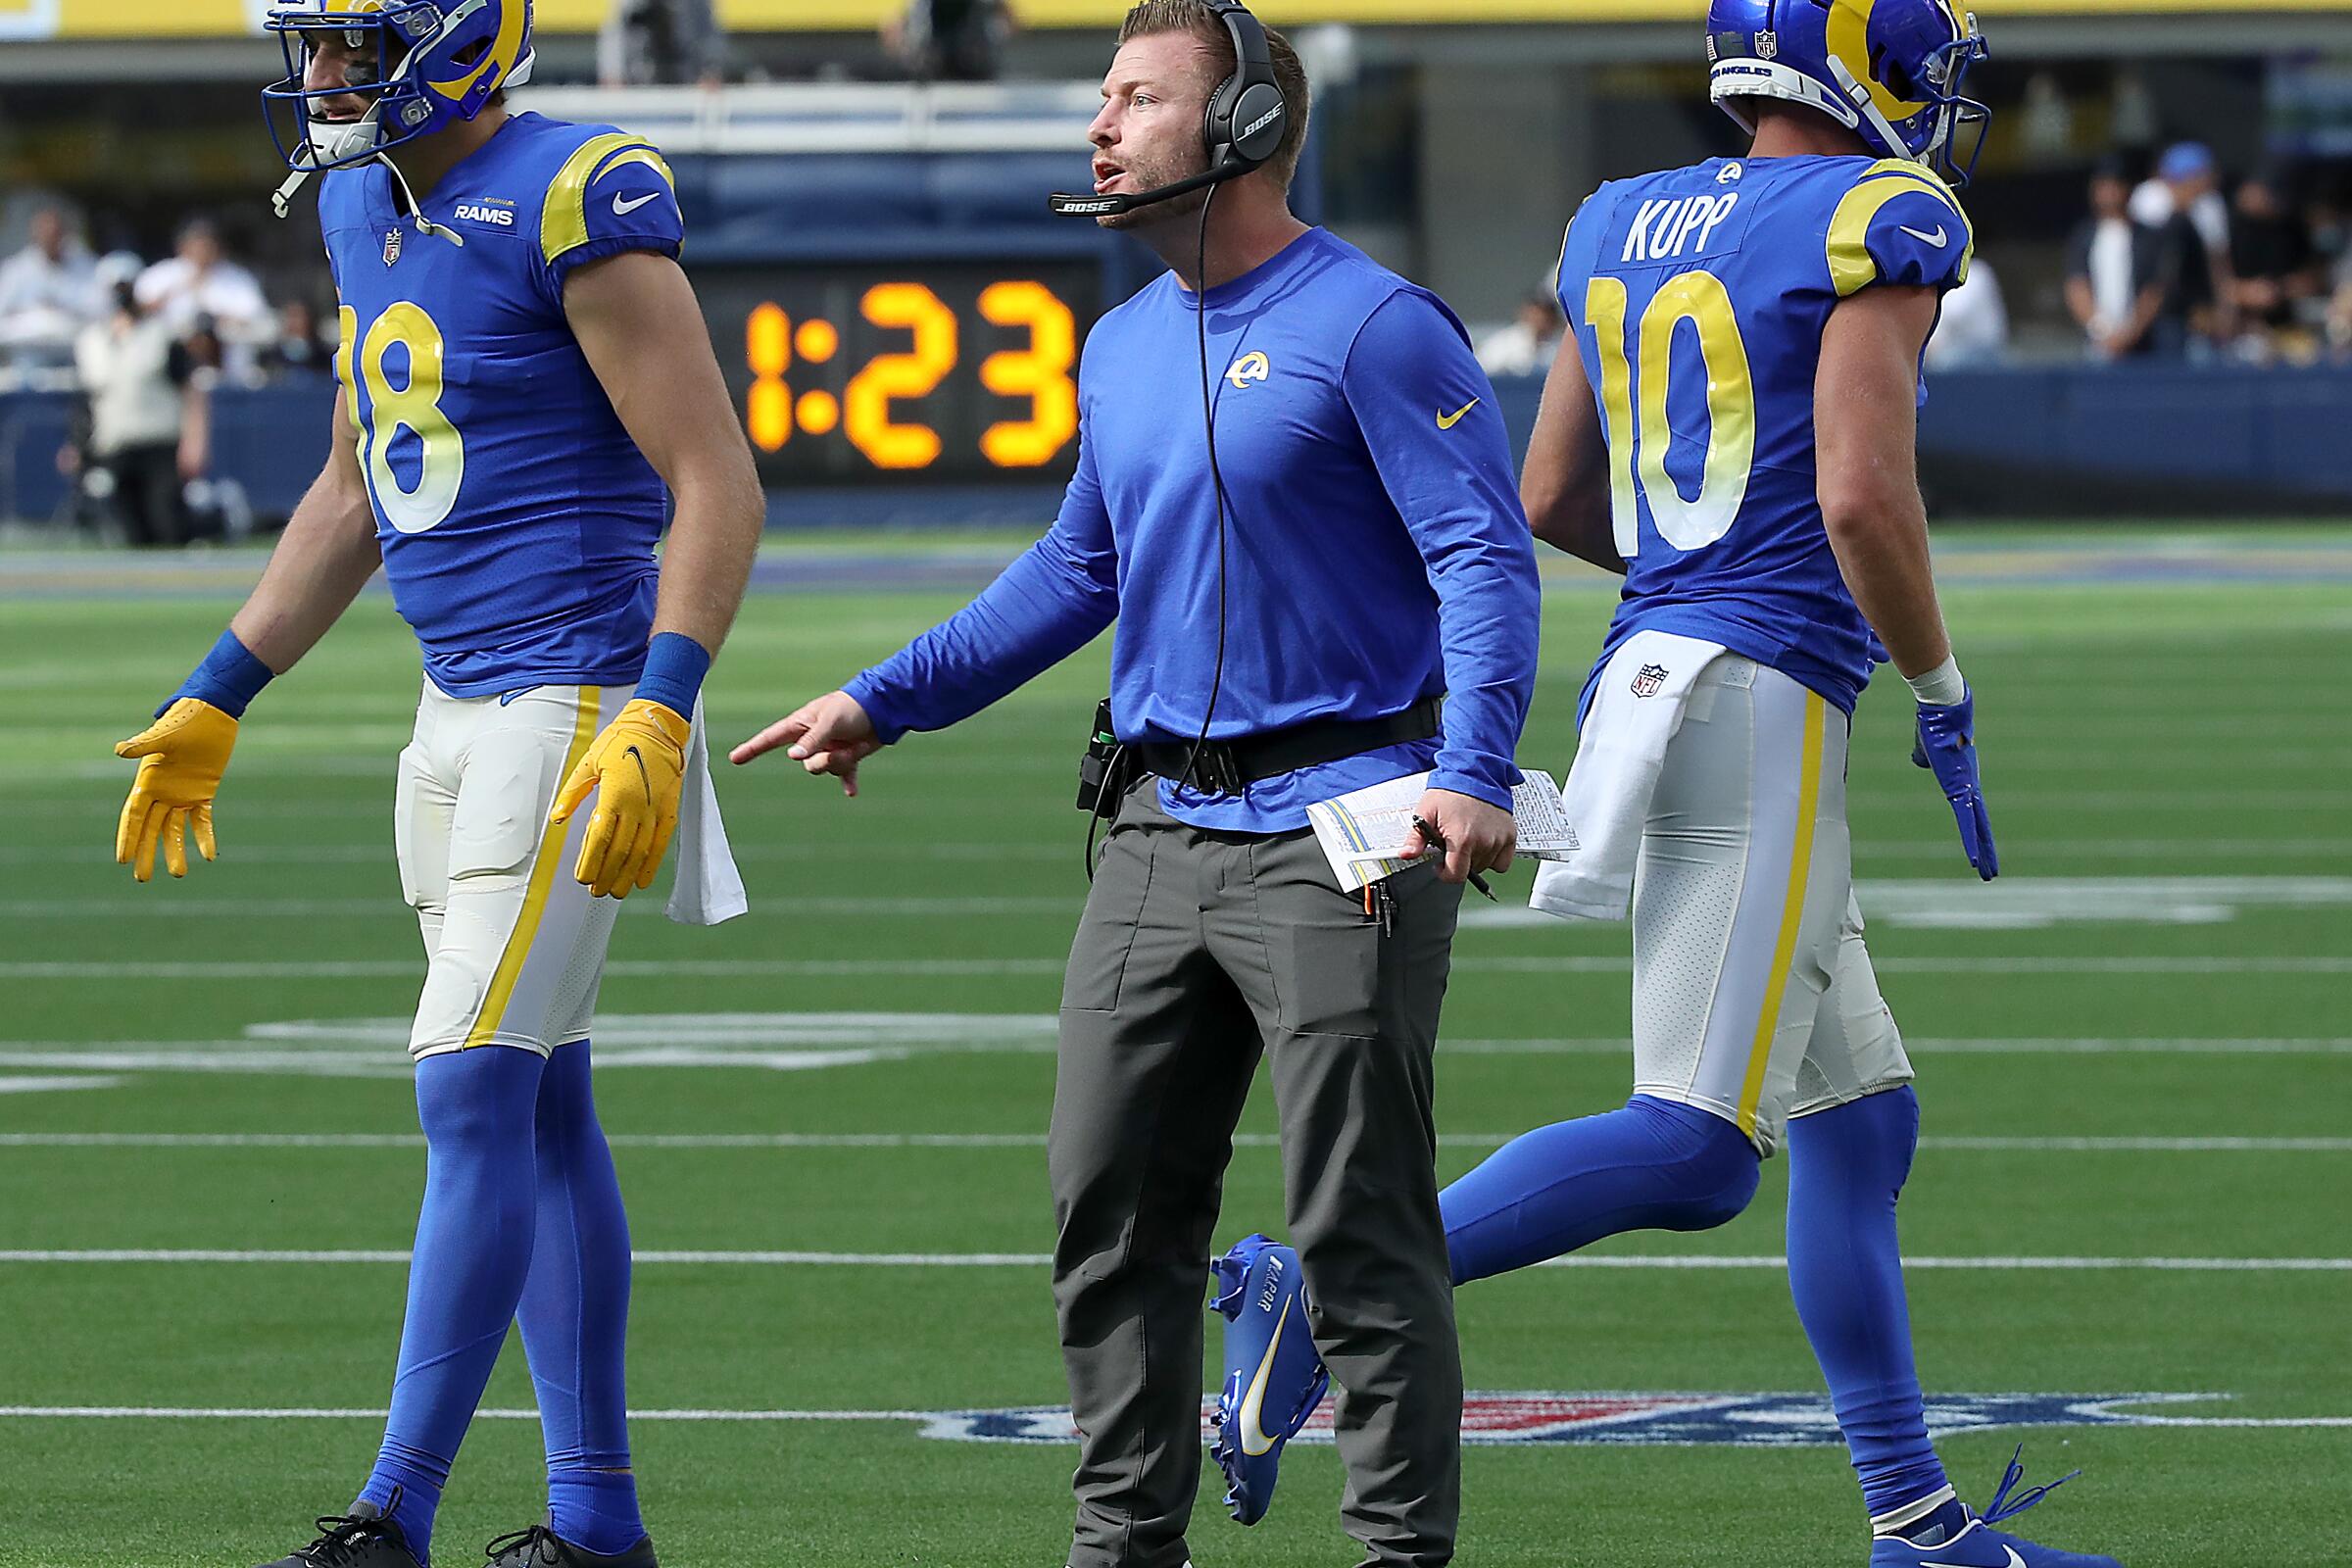 Rams coach Sean McVay gives instructions from the sideline during their game against the Lions.